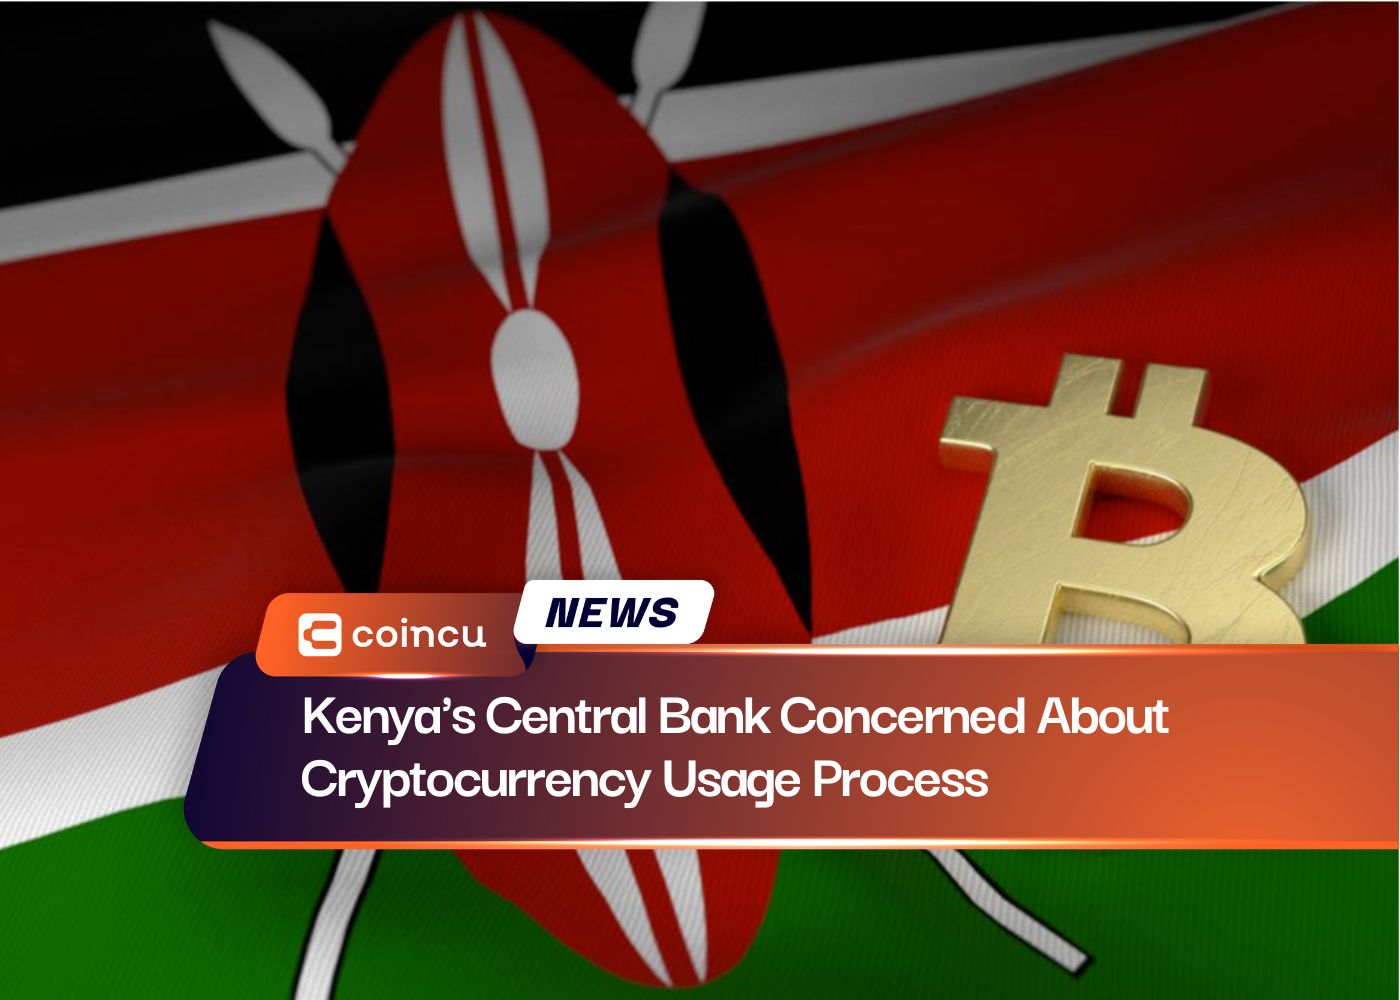 Kenya's Central Bank Concerned About Cryptocurrency Usage Process